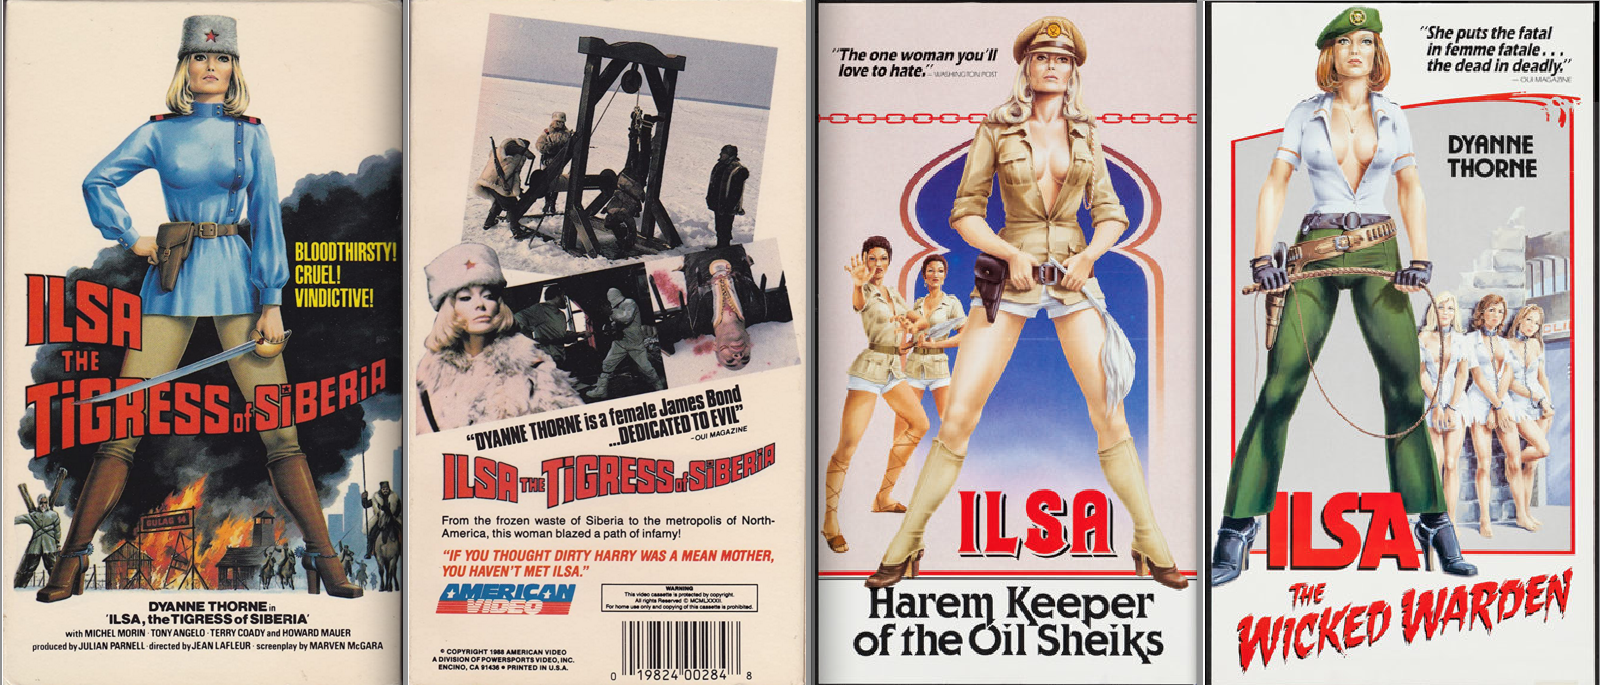 VHS boxes for Ilsa, Harem Keeper of the Oil Sheiks (1976) and other Ilsa movies